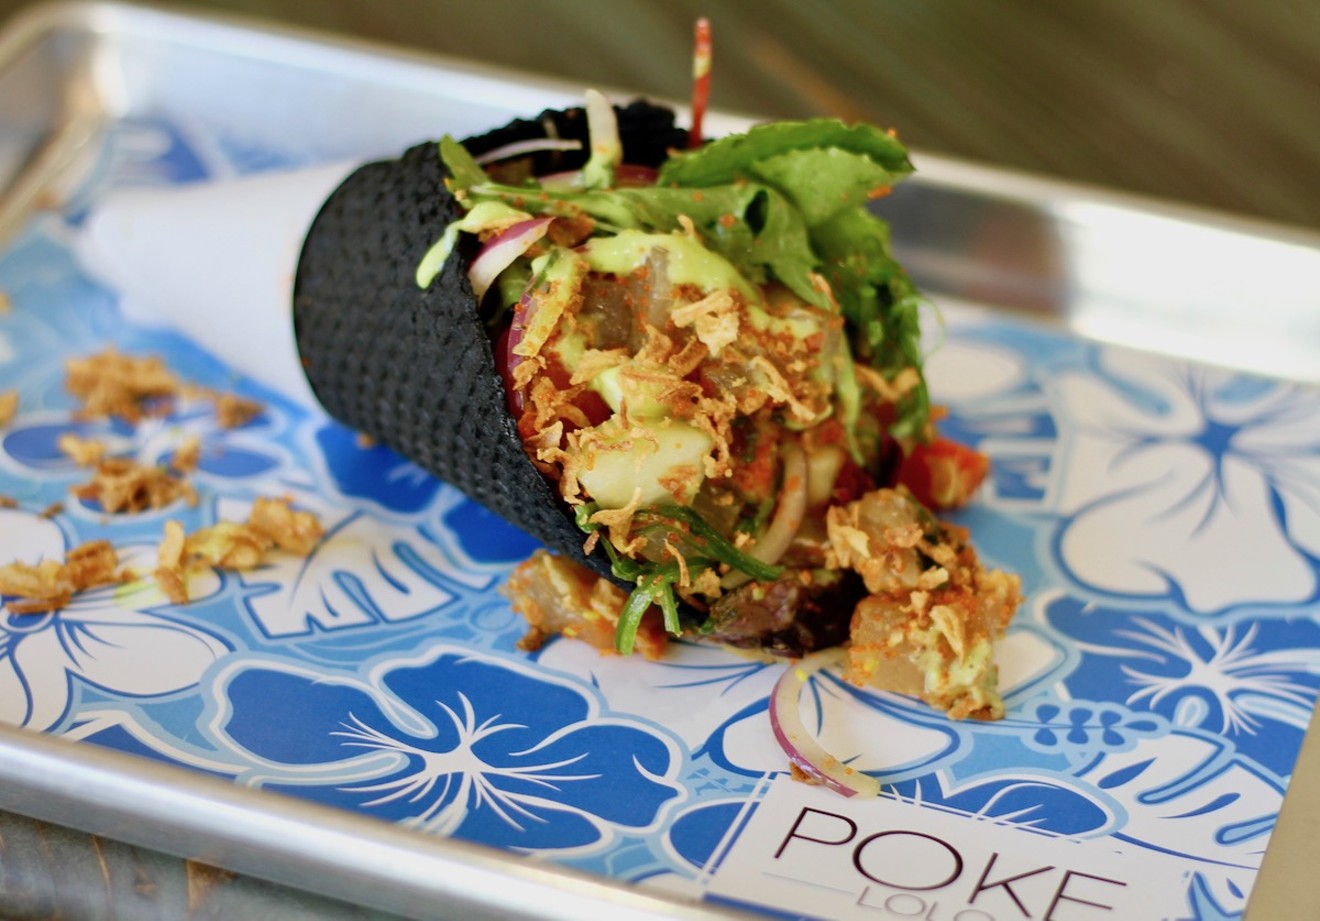 Get South Florida's first poke "cone" at Poke Lolo in Fort Lauderdale.